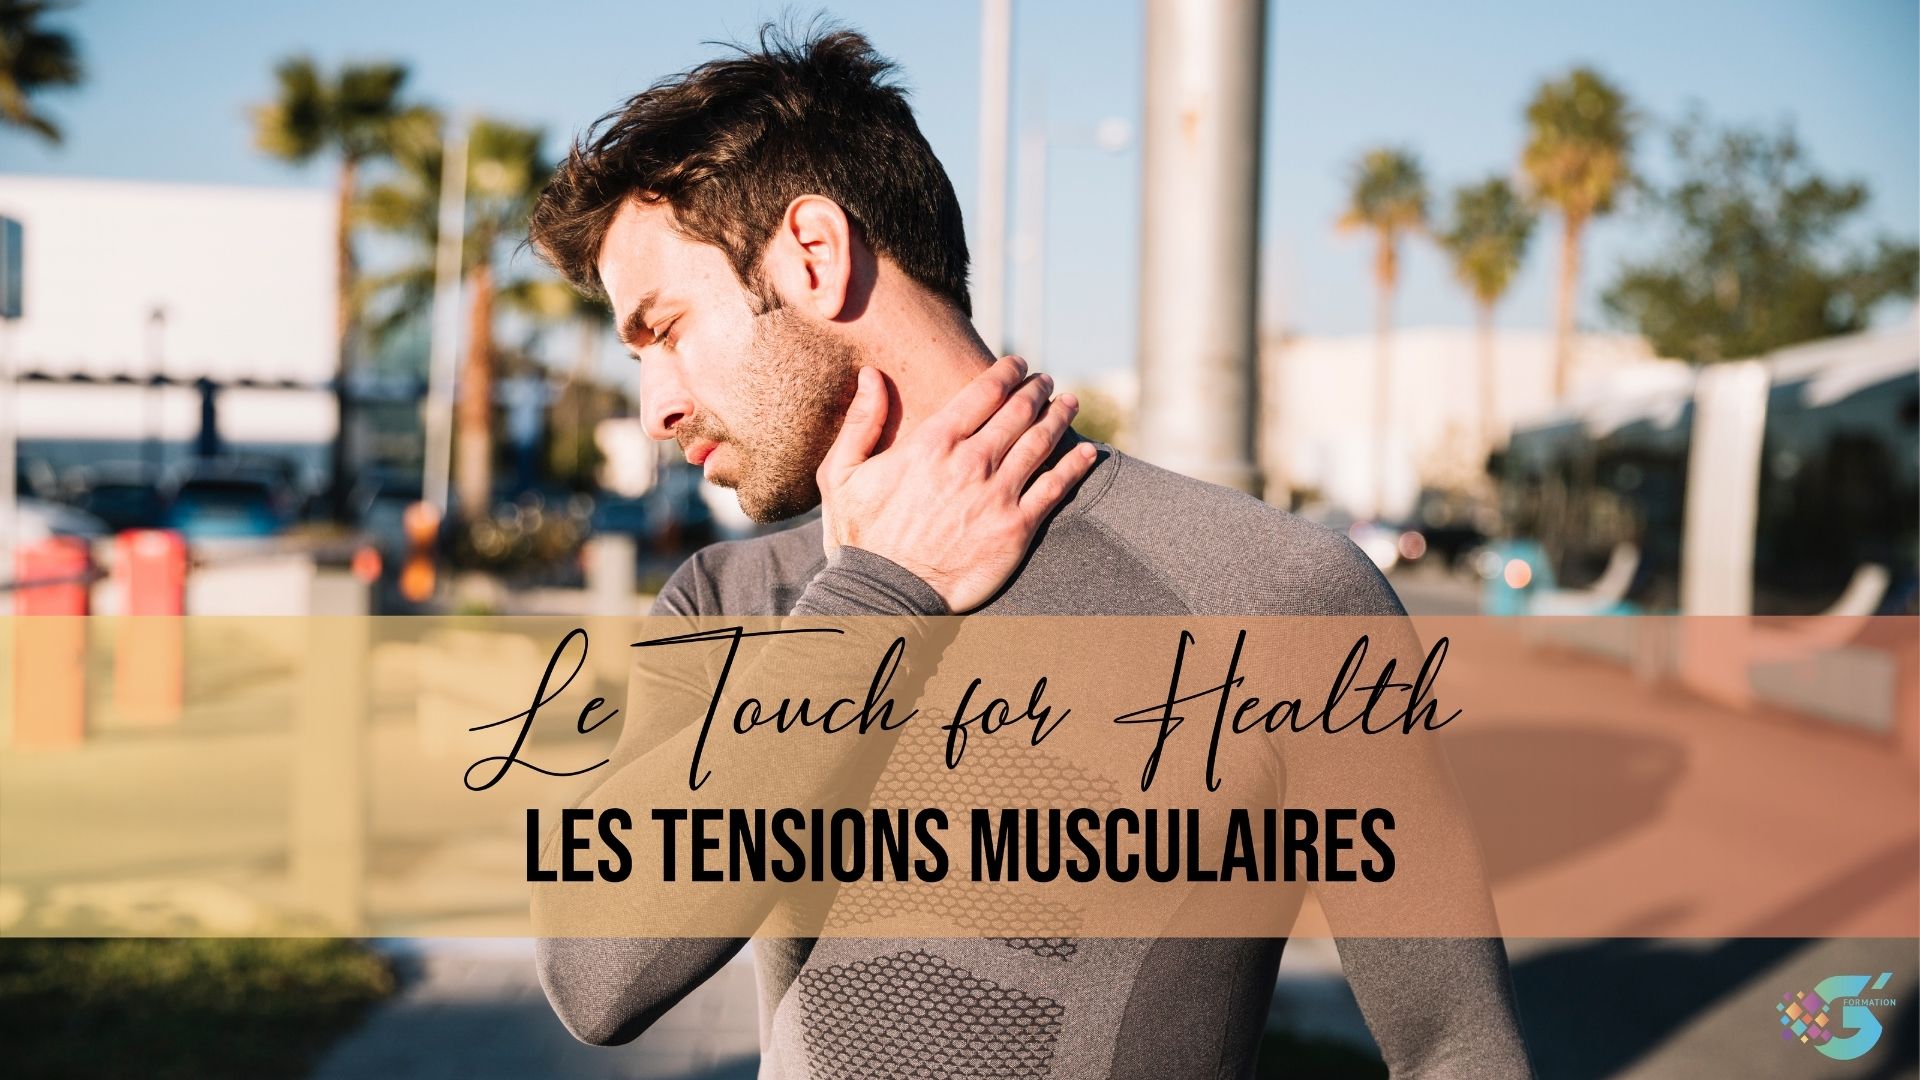 Touch for Health, soulager les tensions musculaires